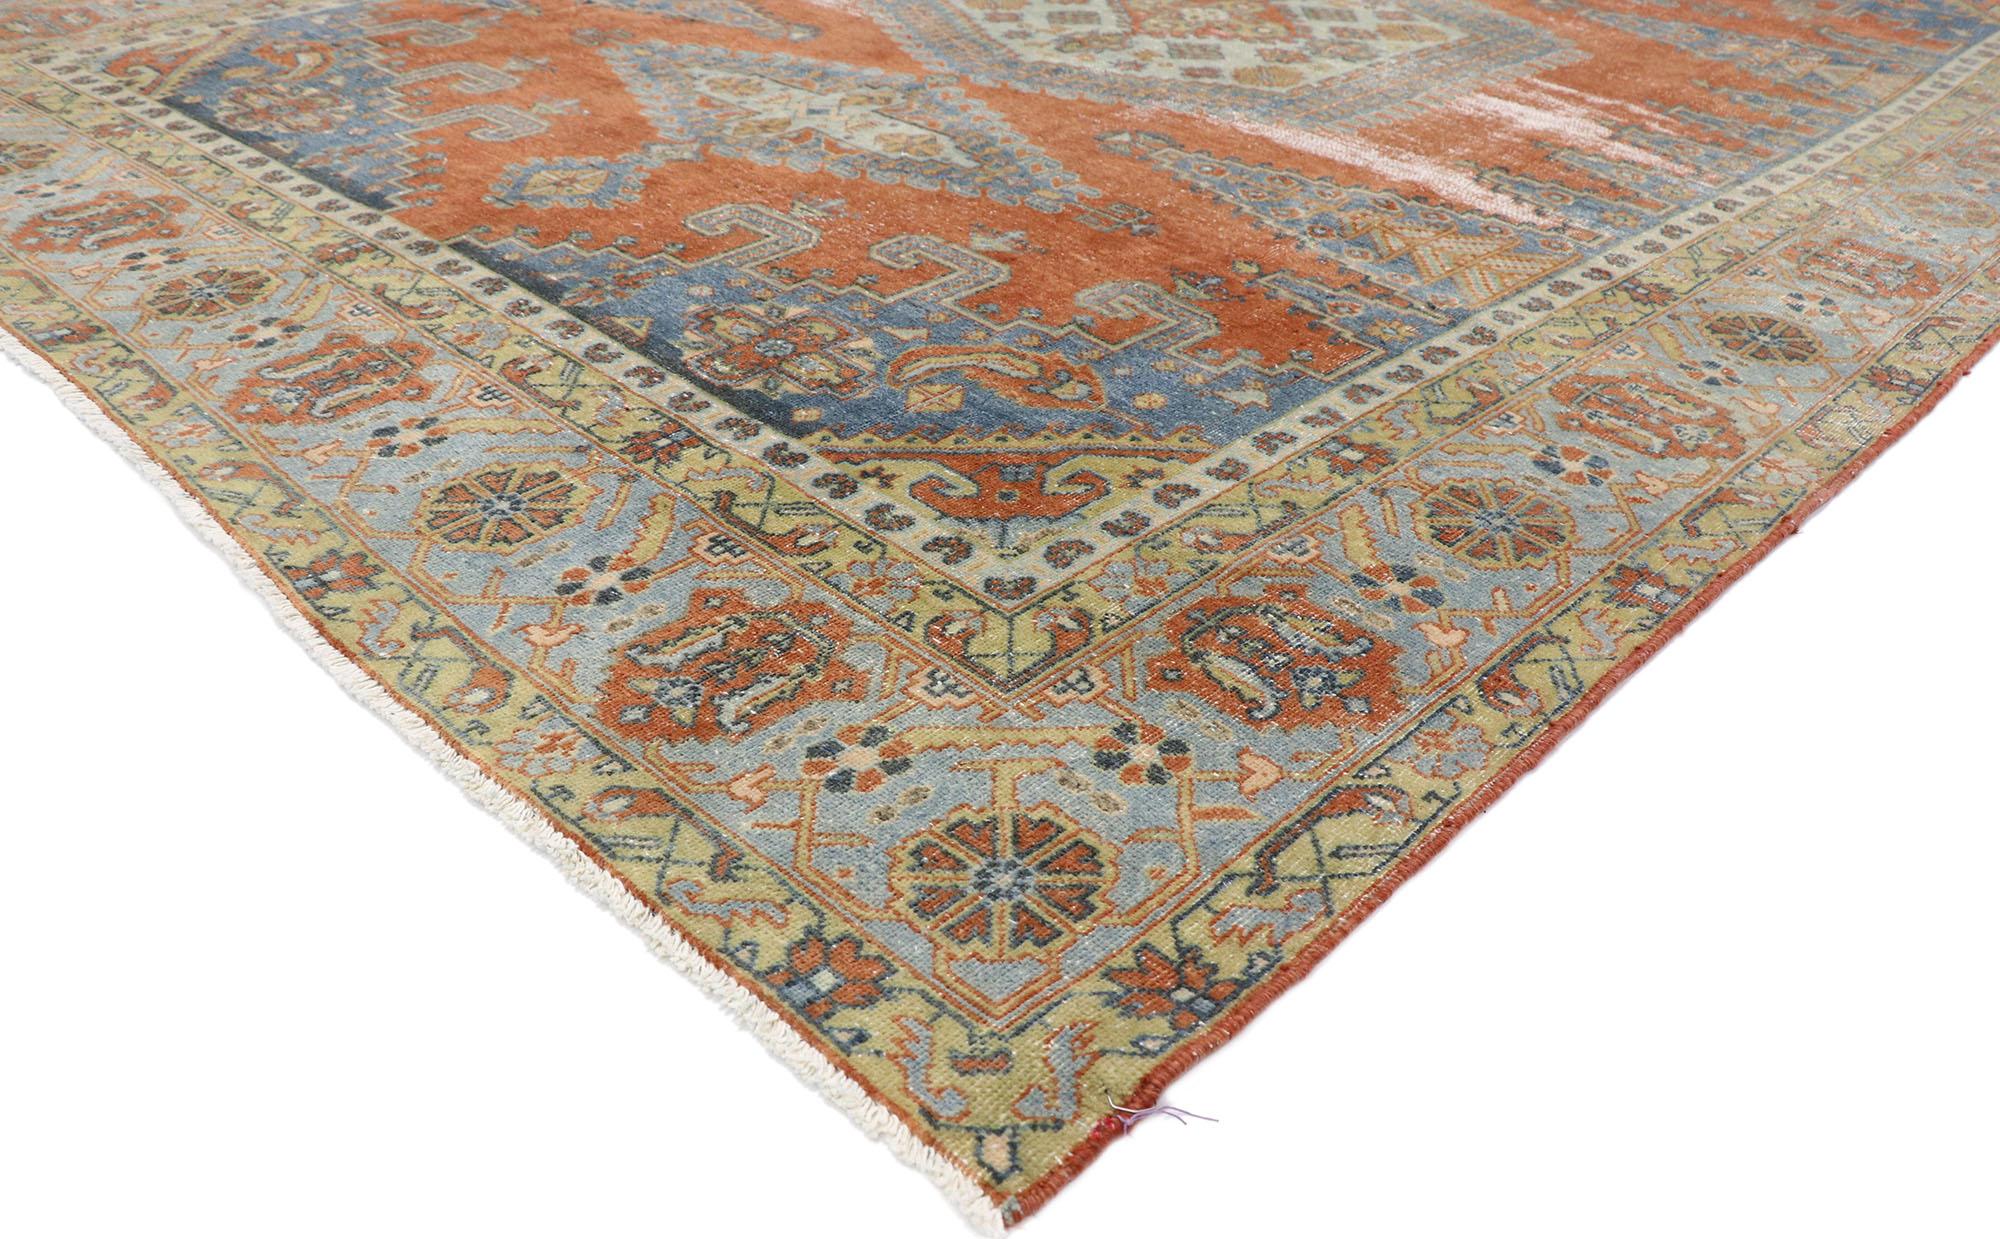 60880 Distressed antique Persian Viss rug with Relaxed Federal style 08'03 x 11'08. Emanating sophistication and nomadic charm with rustic sensibility, this hand knotted wool distressed antique Persian Viss rug beautifully embodies a modern tribal